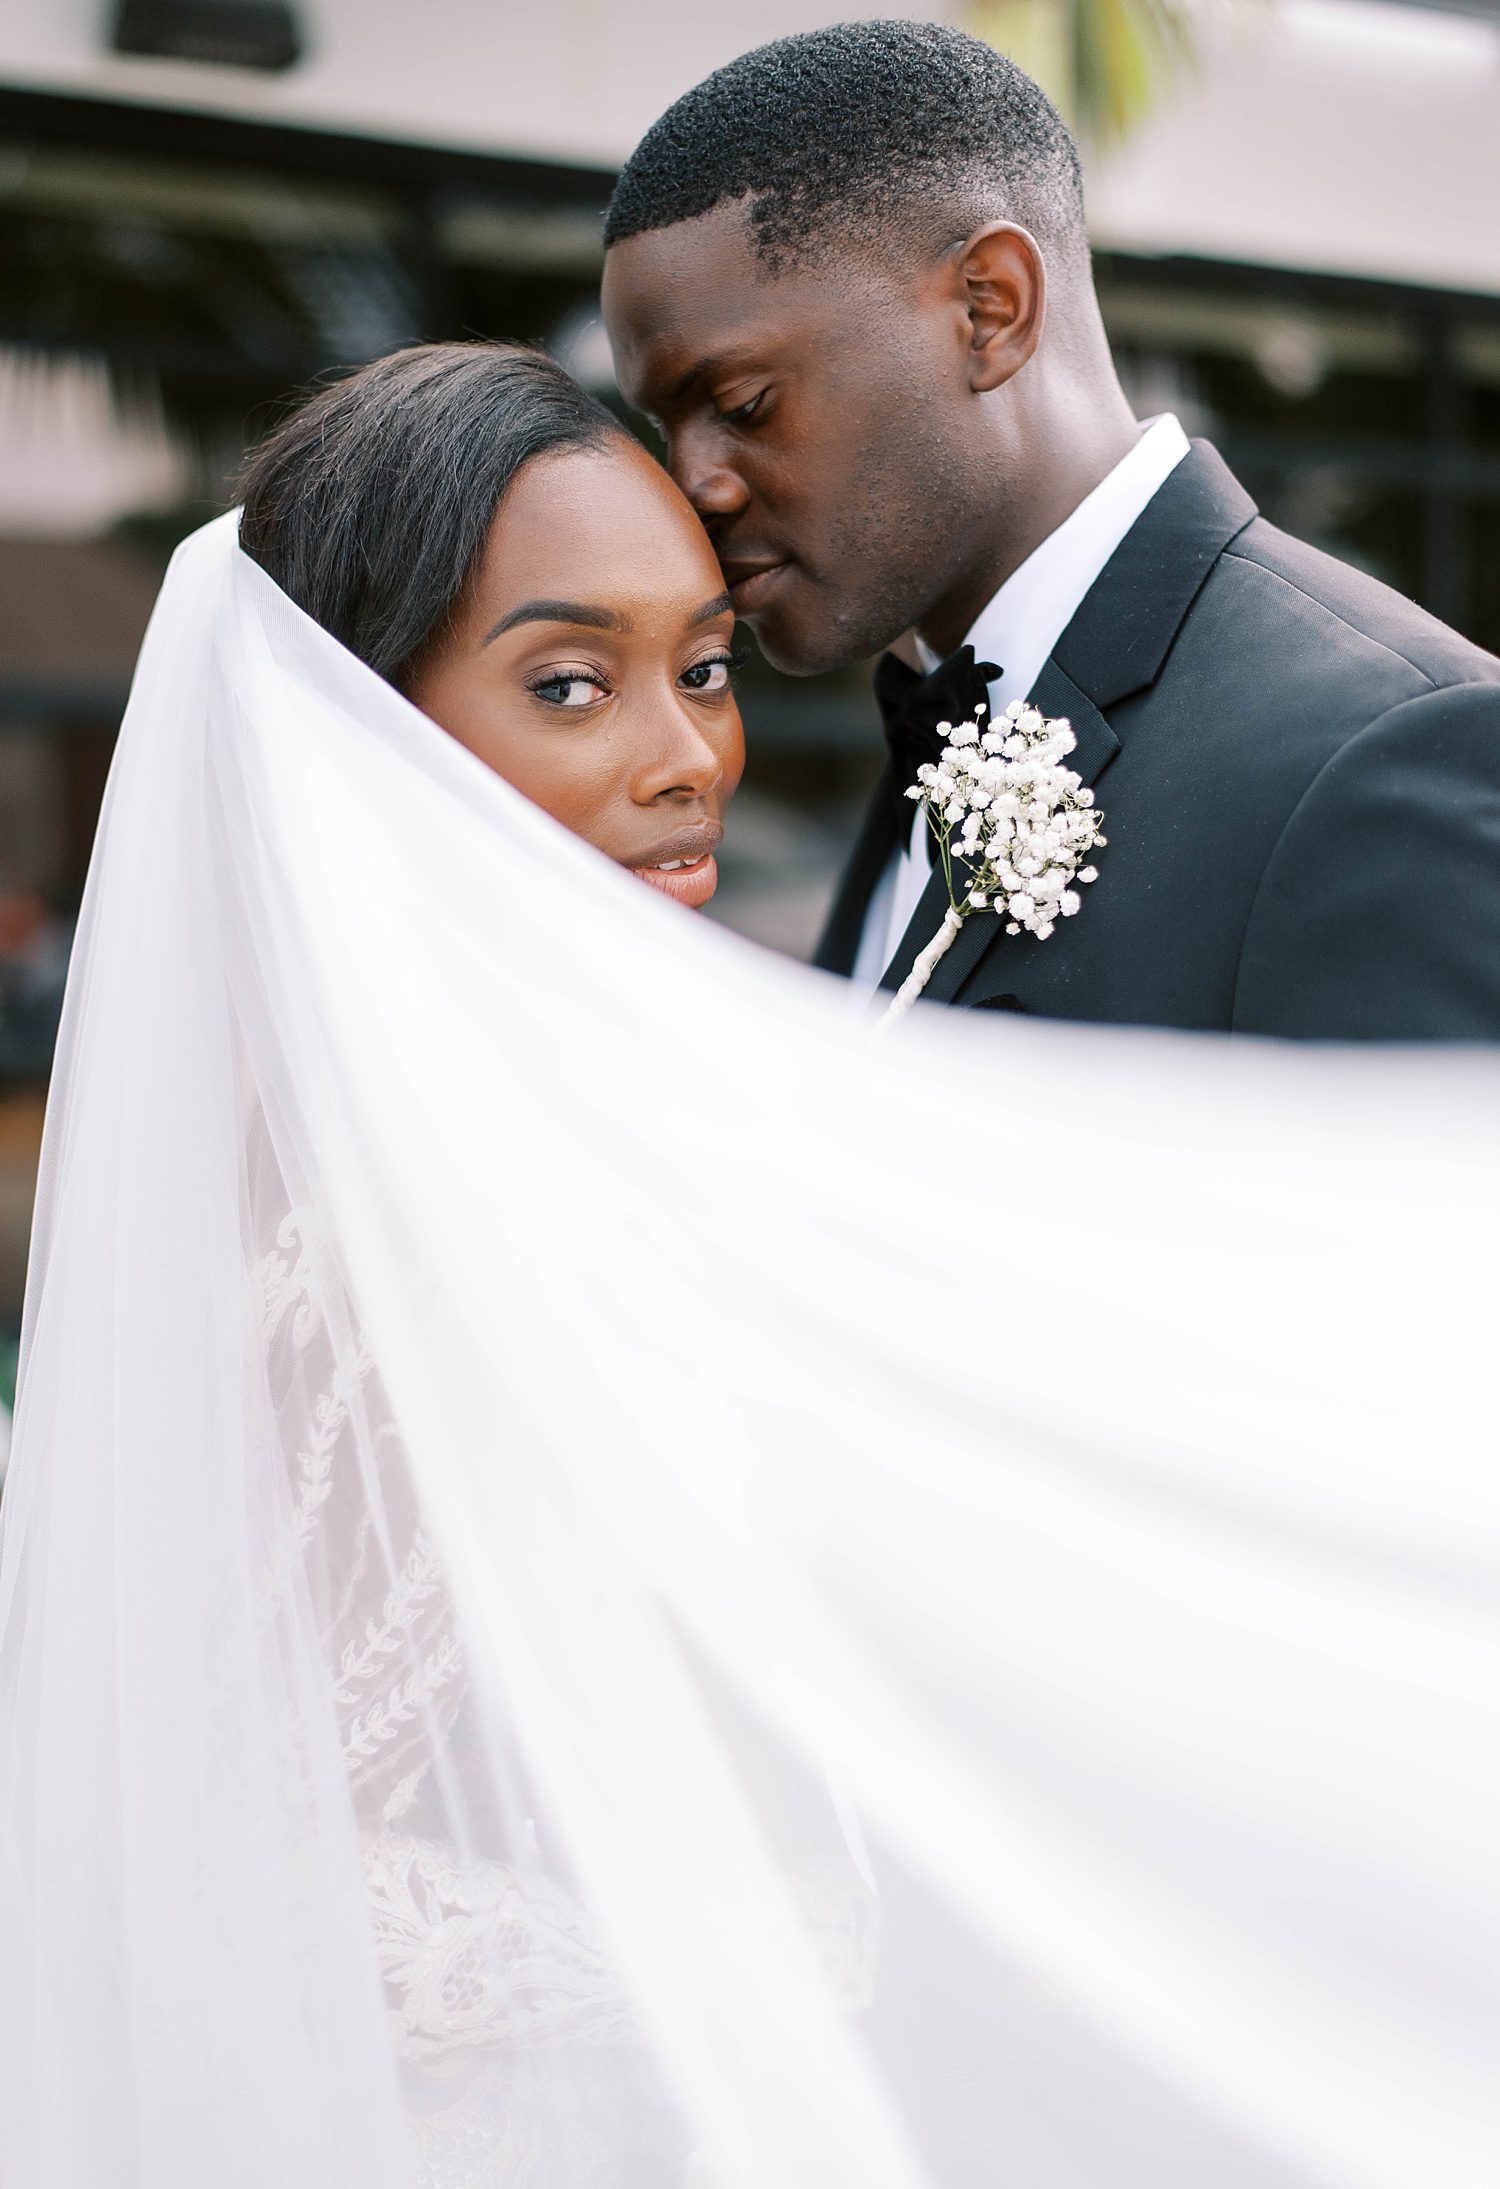 groom leans into bride's forehead with veil draped around them